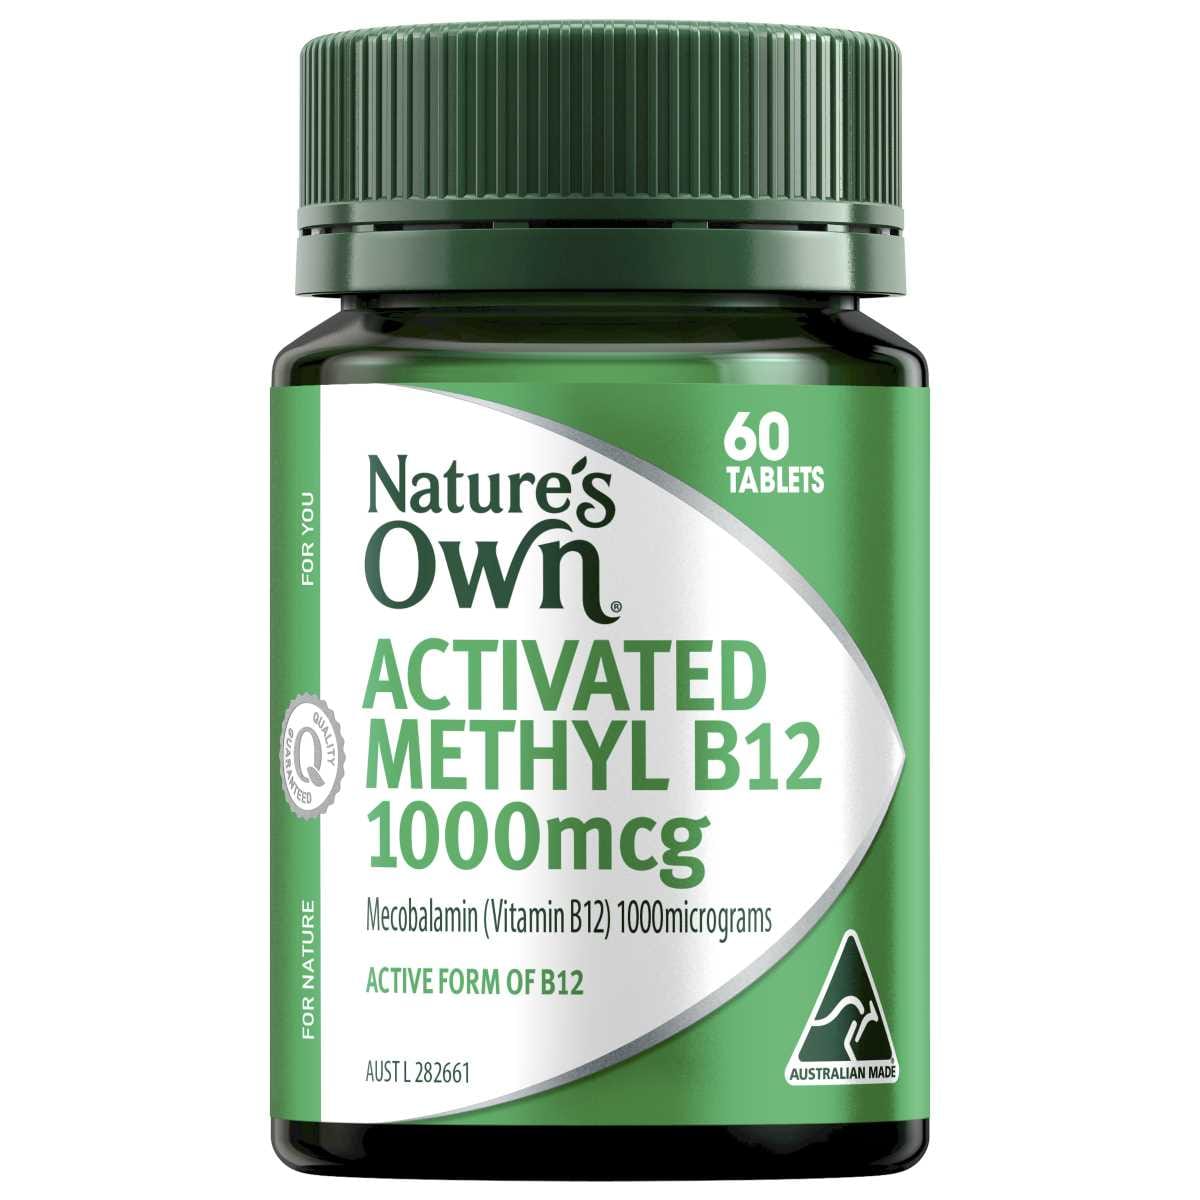 Natures Own Activated Methyl B12 60 Tablets Australia